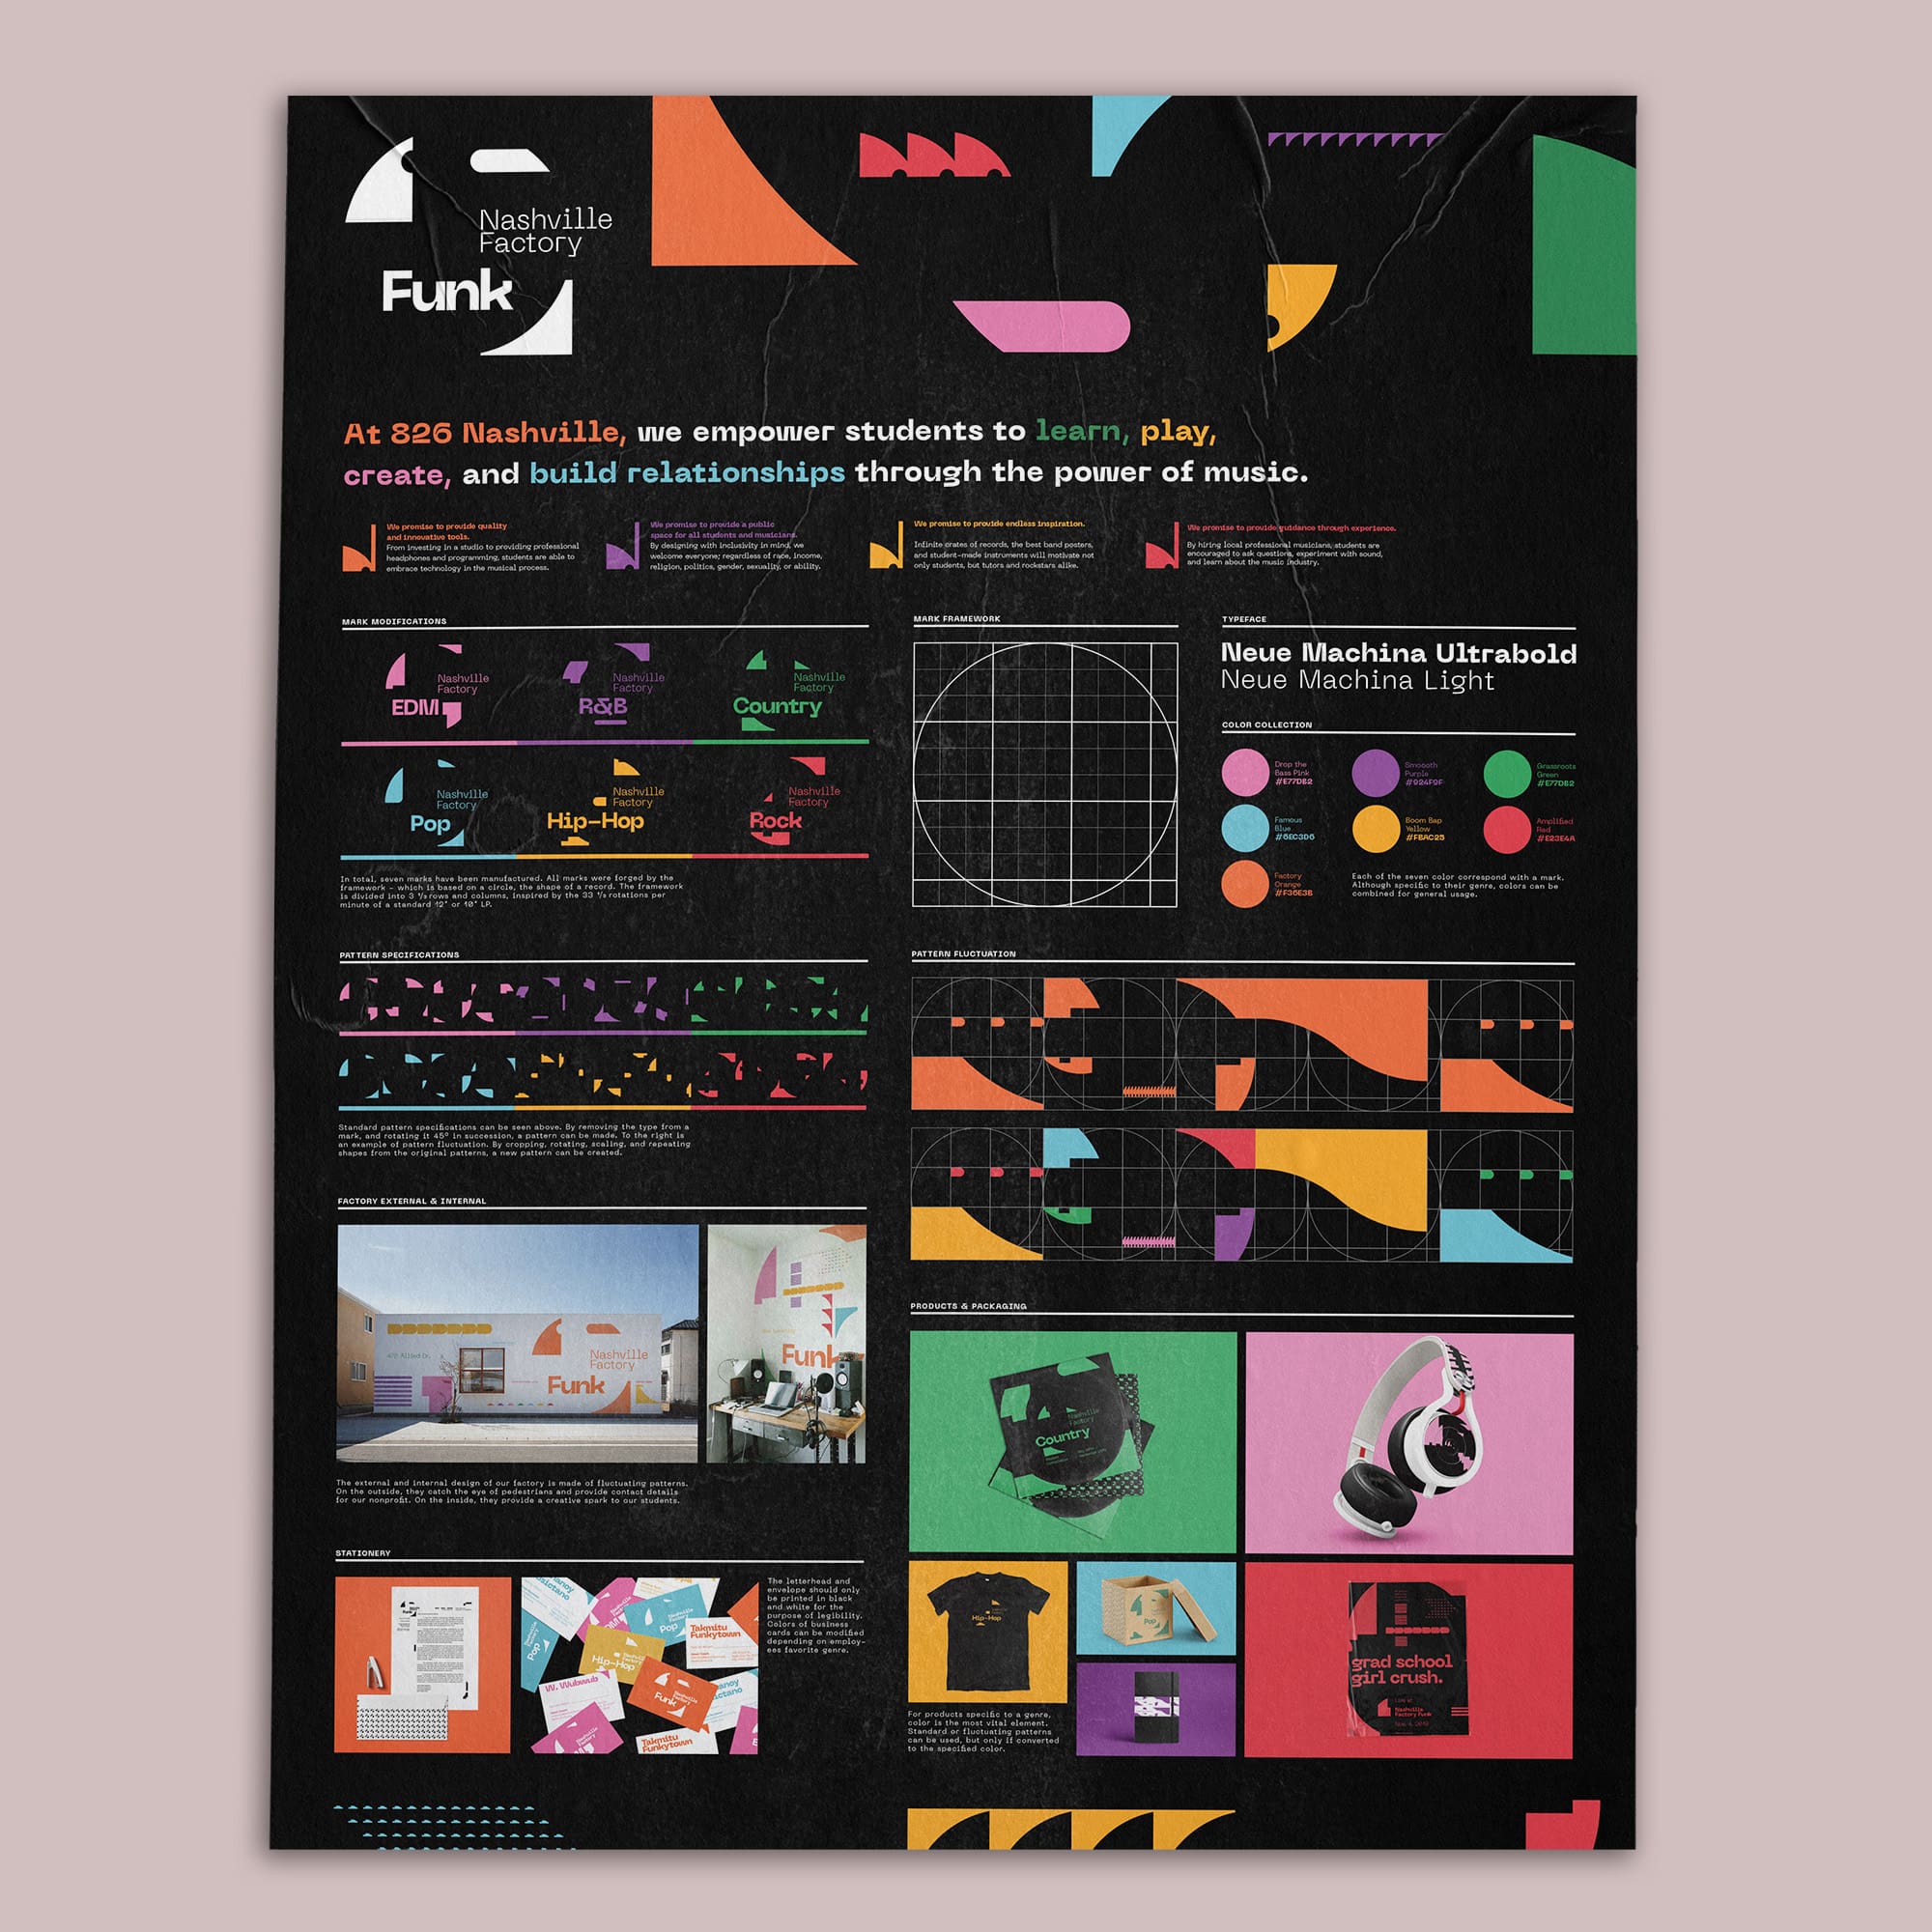 Poster showing the brand guidelines for a conceptual 826 tutoring center in Nashville. Shows a large black poster with many different graphs, photos, symbols, and text. The color scheme is orange, red, pink, green, light blue, and a bit of purple and white.